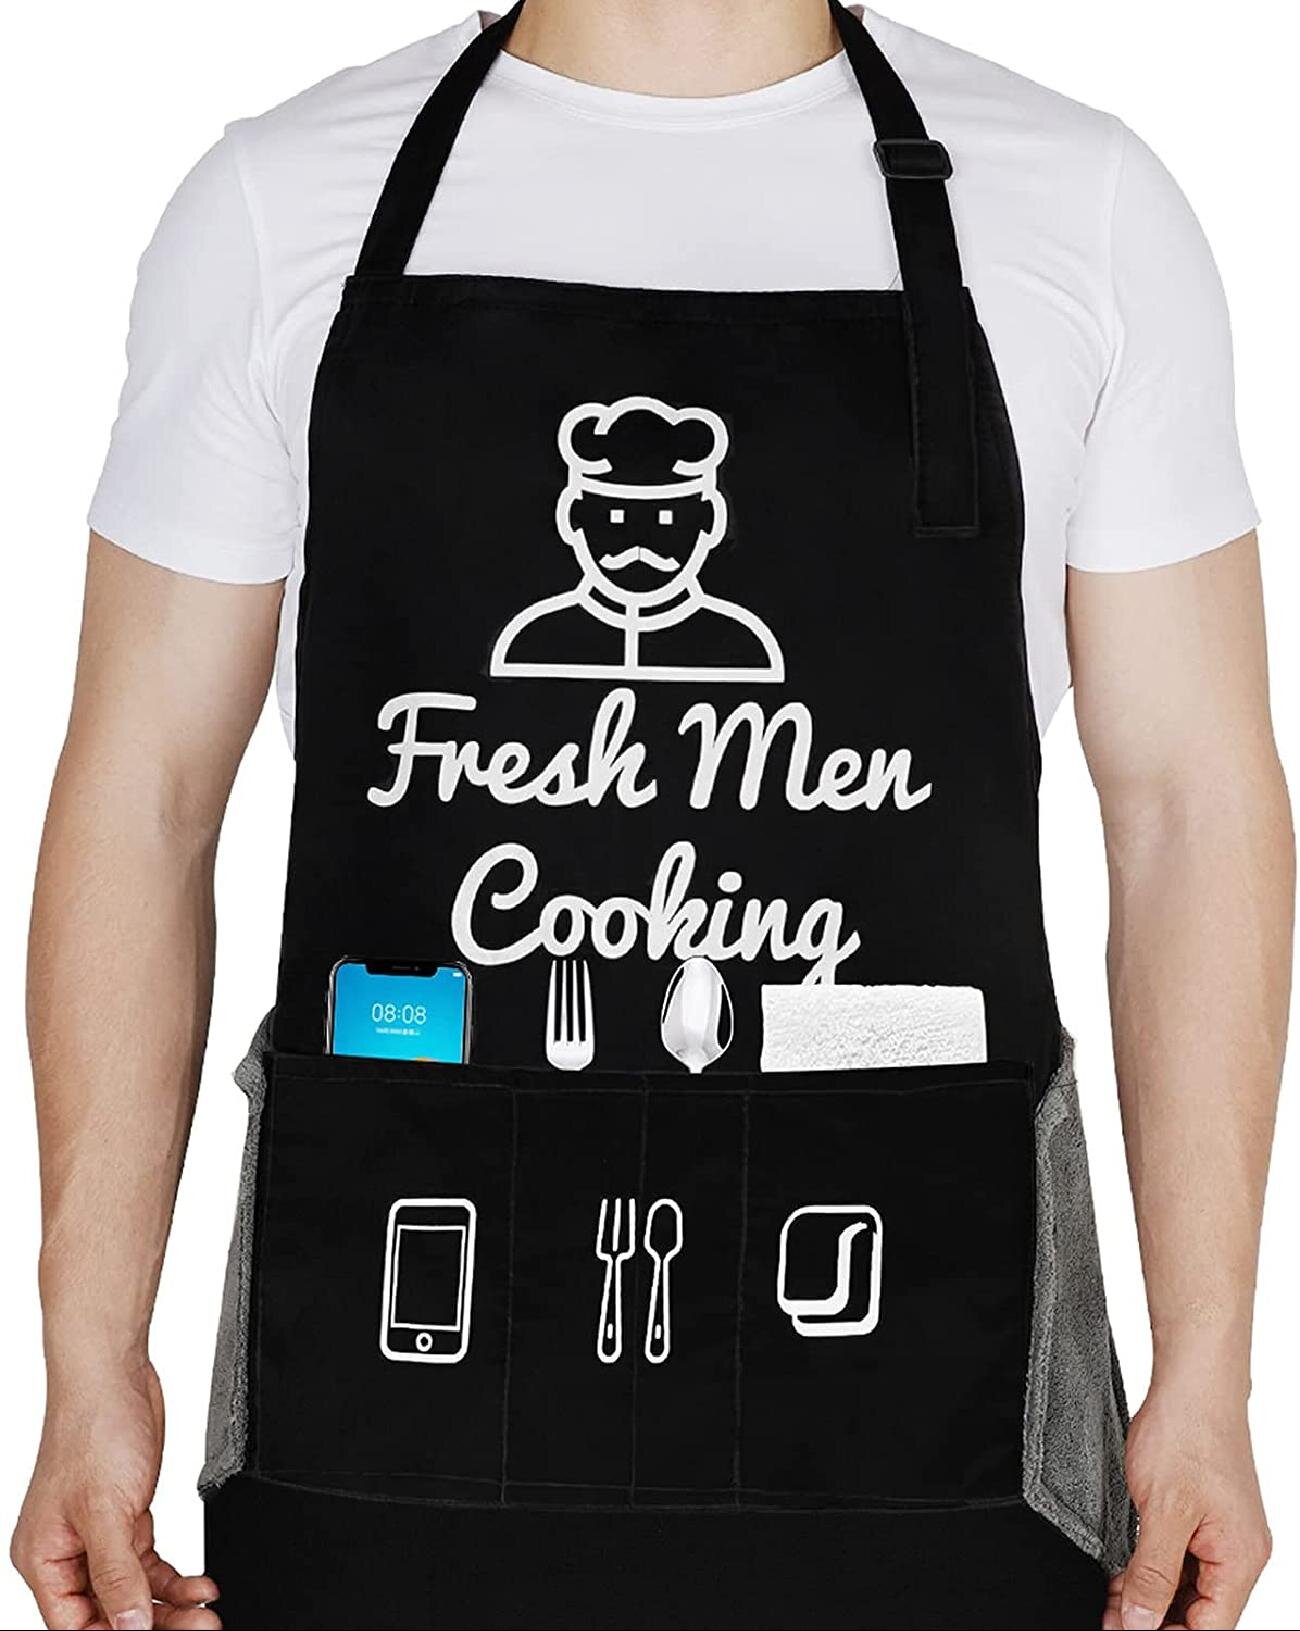 Grill Apron for Men Ill Feed Cooking Apron Dad Apron Funny Aprons Fathers Day Funny Birthday Gifts For Men 